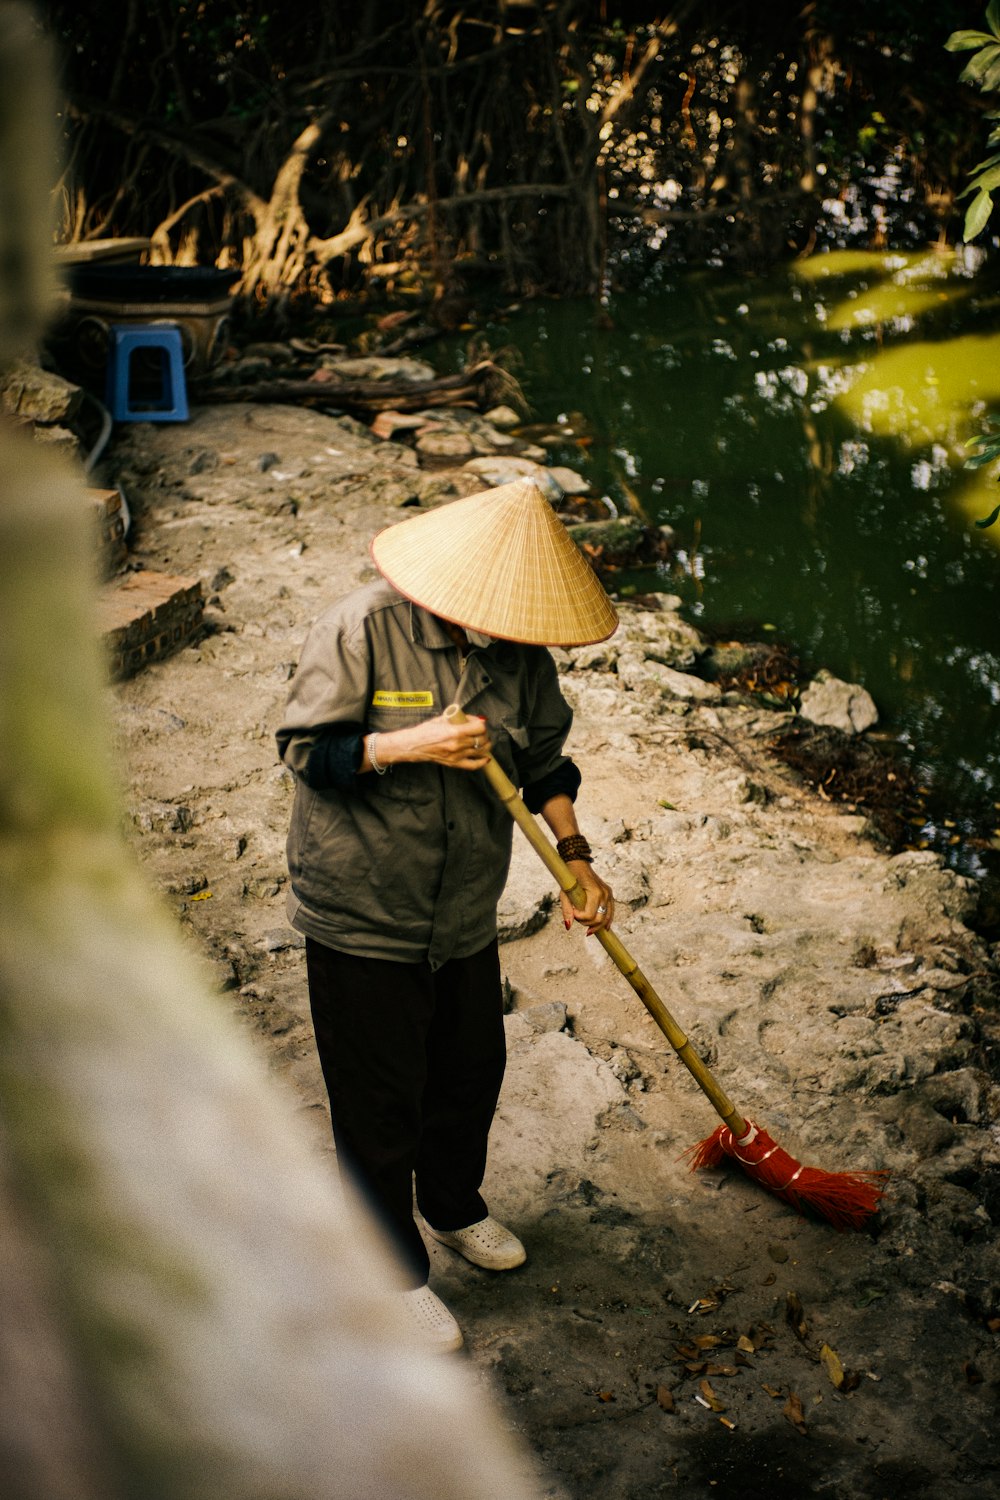 a woman with a straw hat is holding a shovel